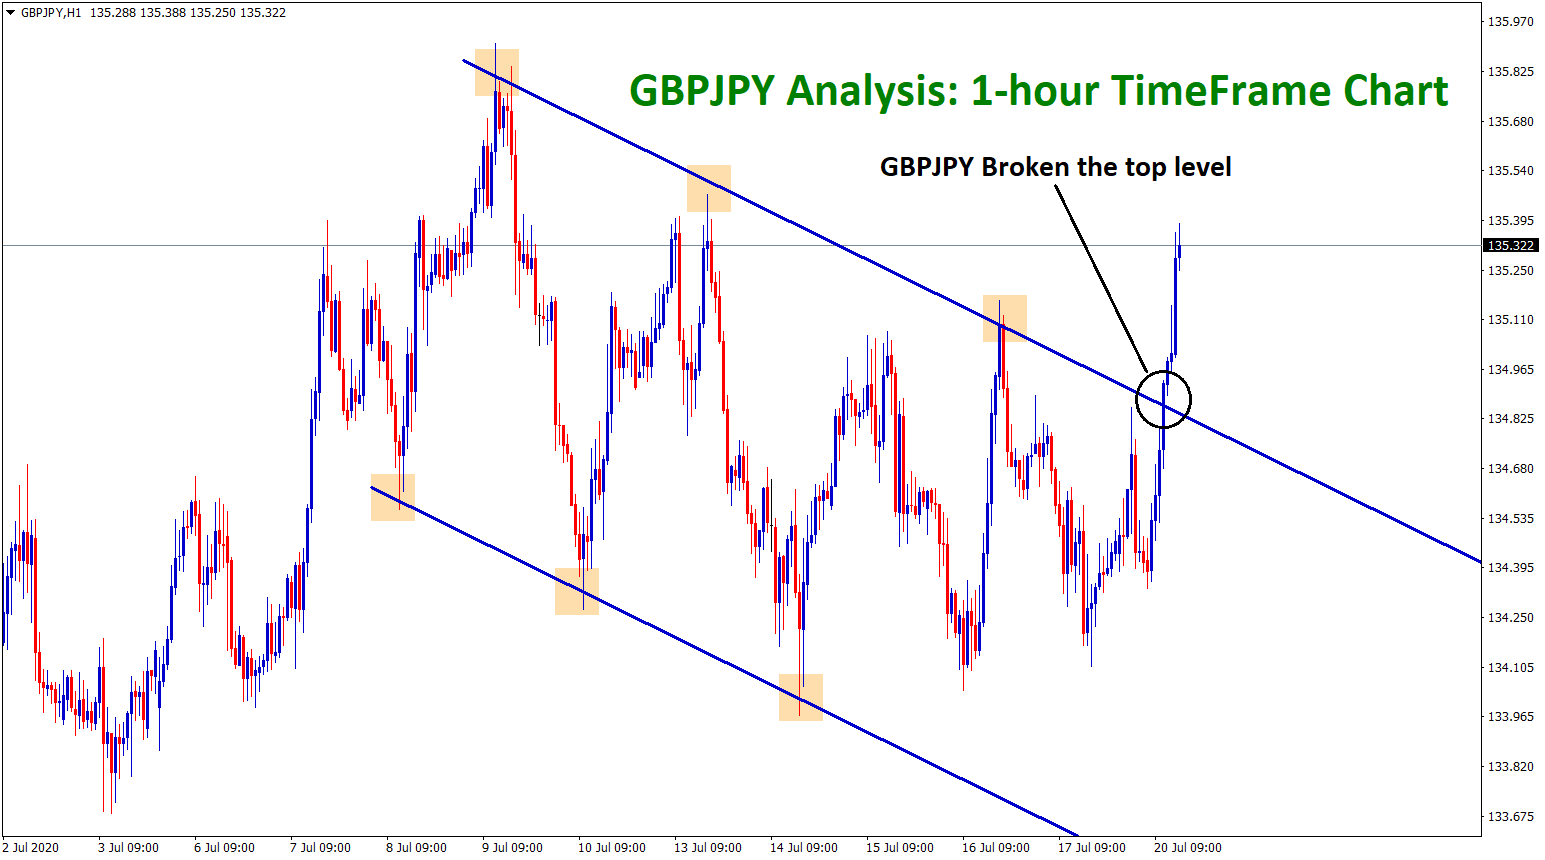 GBPJPY broken the top zone of the h1 tf